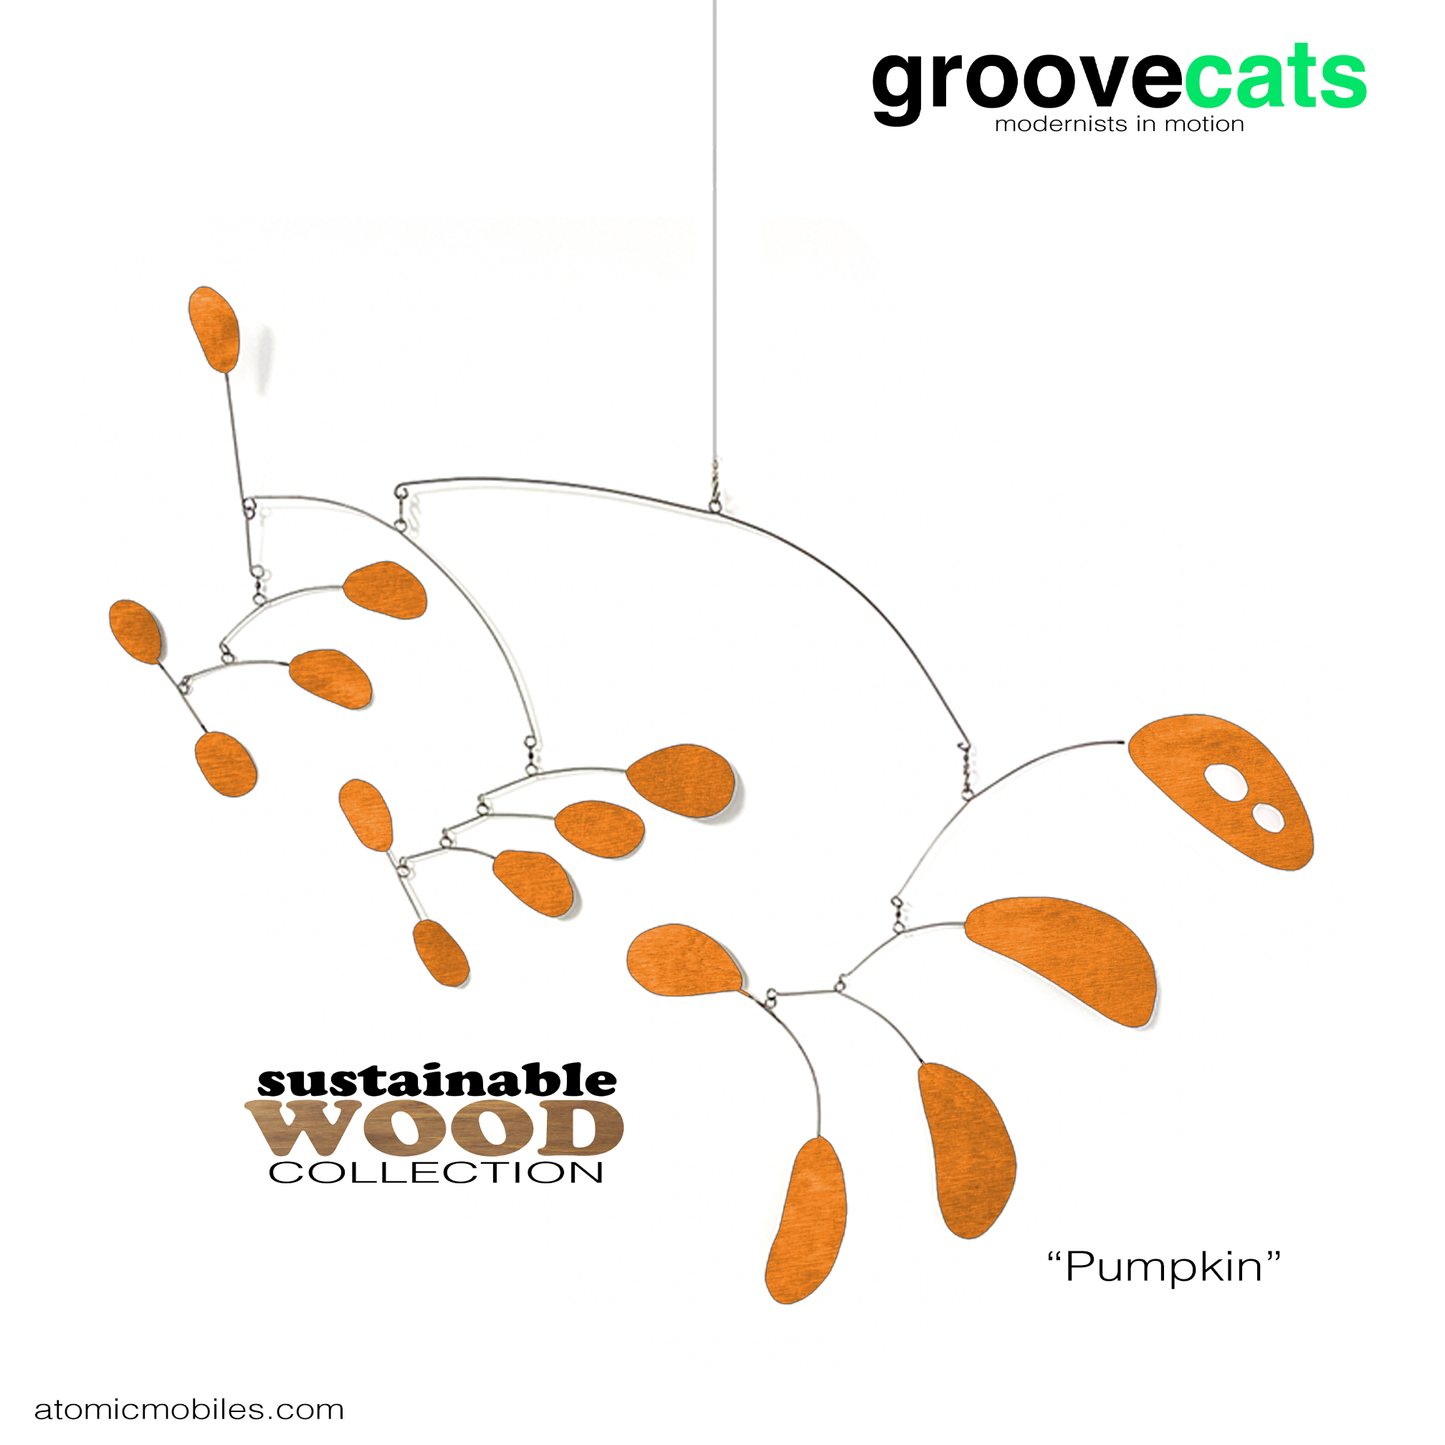 Sustainable Wood HipCat | GrooveCats Mobiles